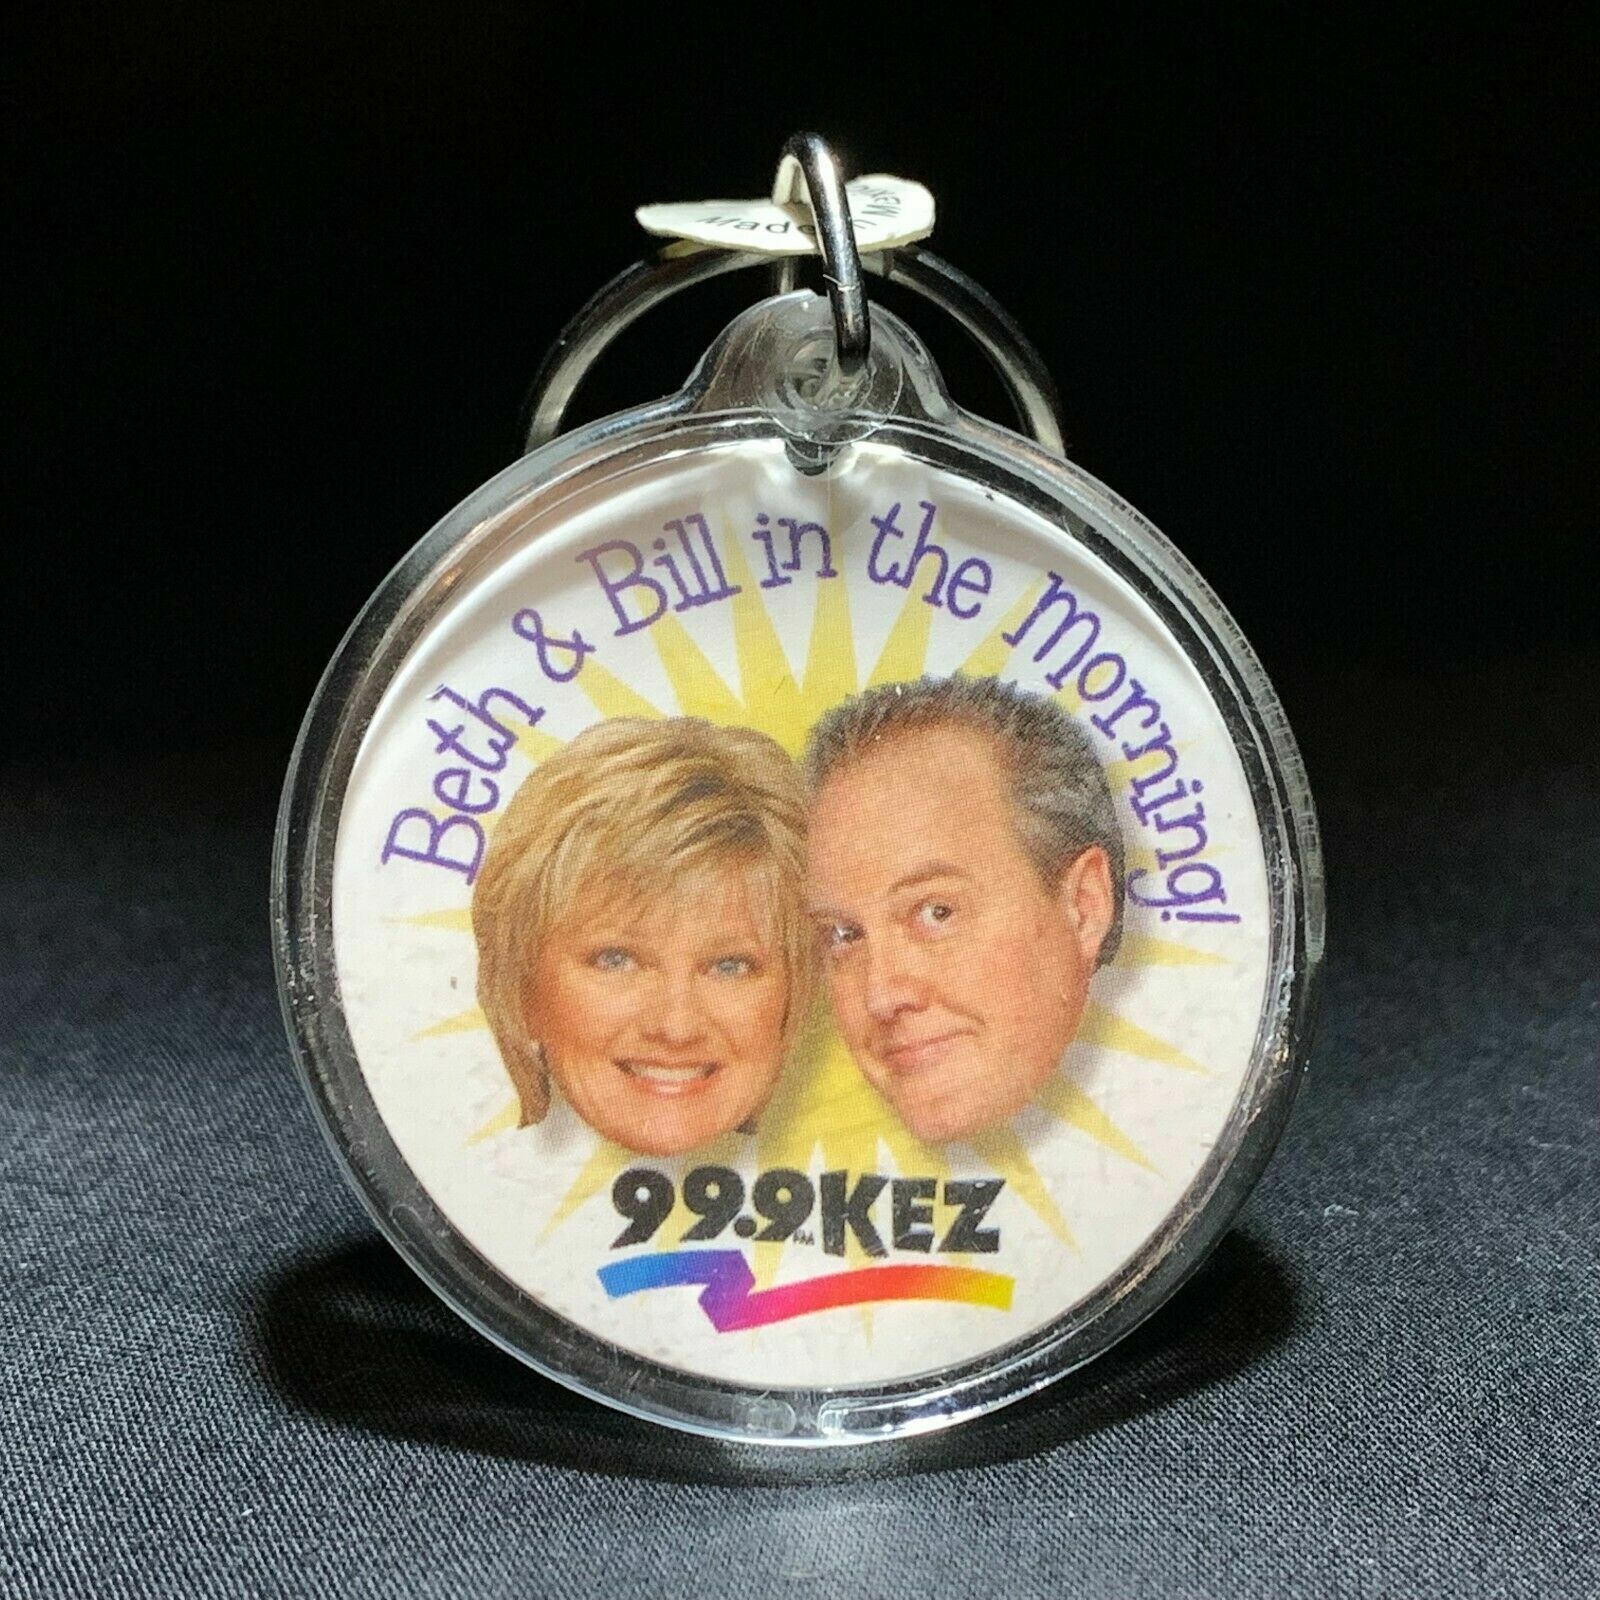 Beth & Bill In The Morning Keychain 99.9KEZ What's The Key To Starting Your Day 